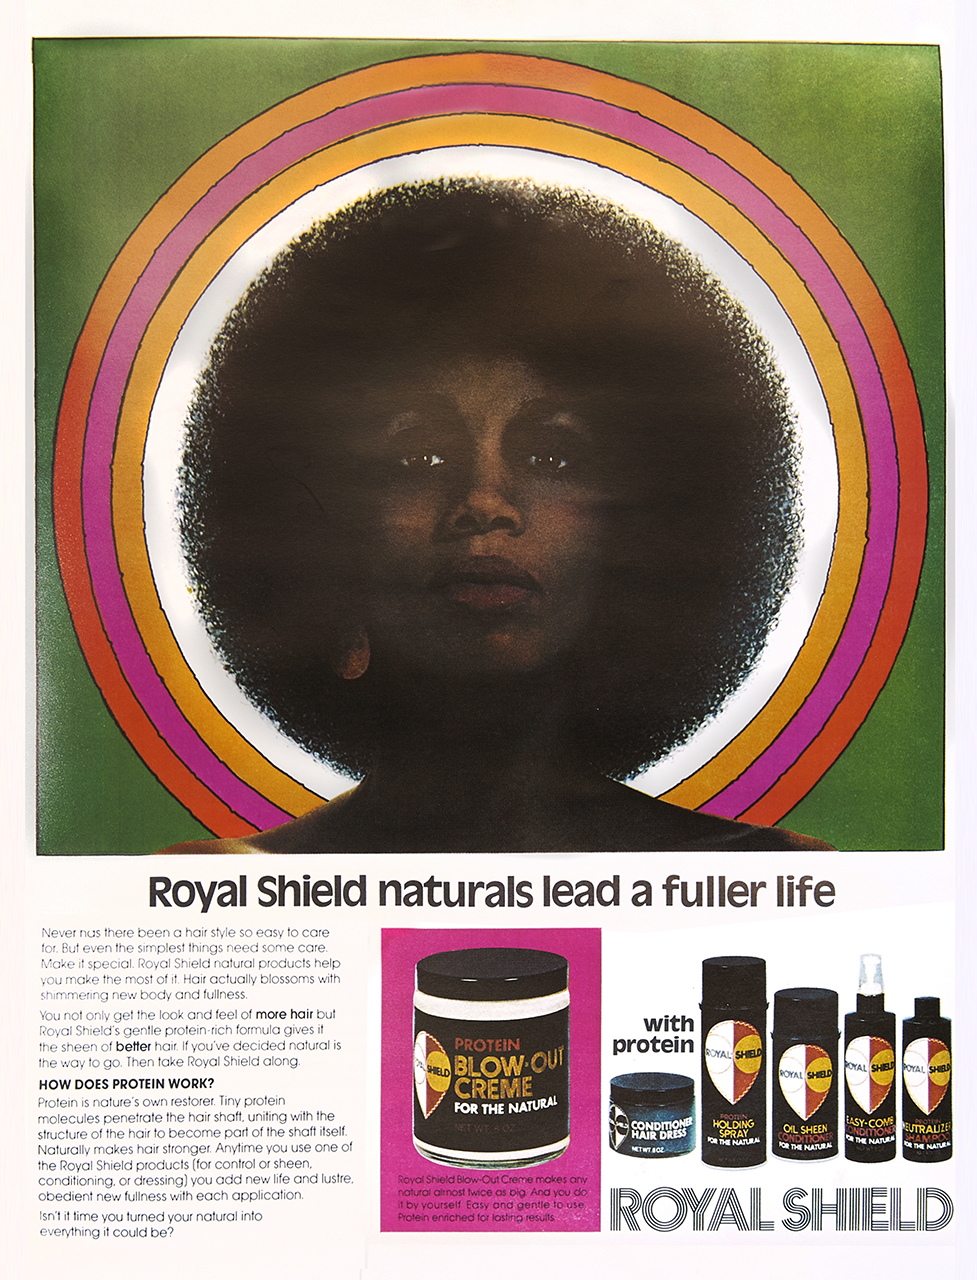 An advertisement featuring an illustration of a black woman with an afro hairstyle in front of a series of coloured rings in orange, pink, yellow and white. The overall background is green. Below the illustration is text stating 'Royal Shield naturals live a fuller life' in big letters with further description of the product below it alongside images of the hair product in its packaging.